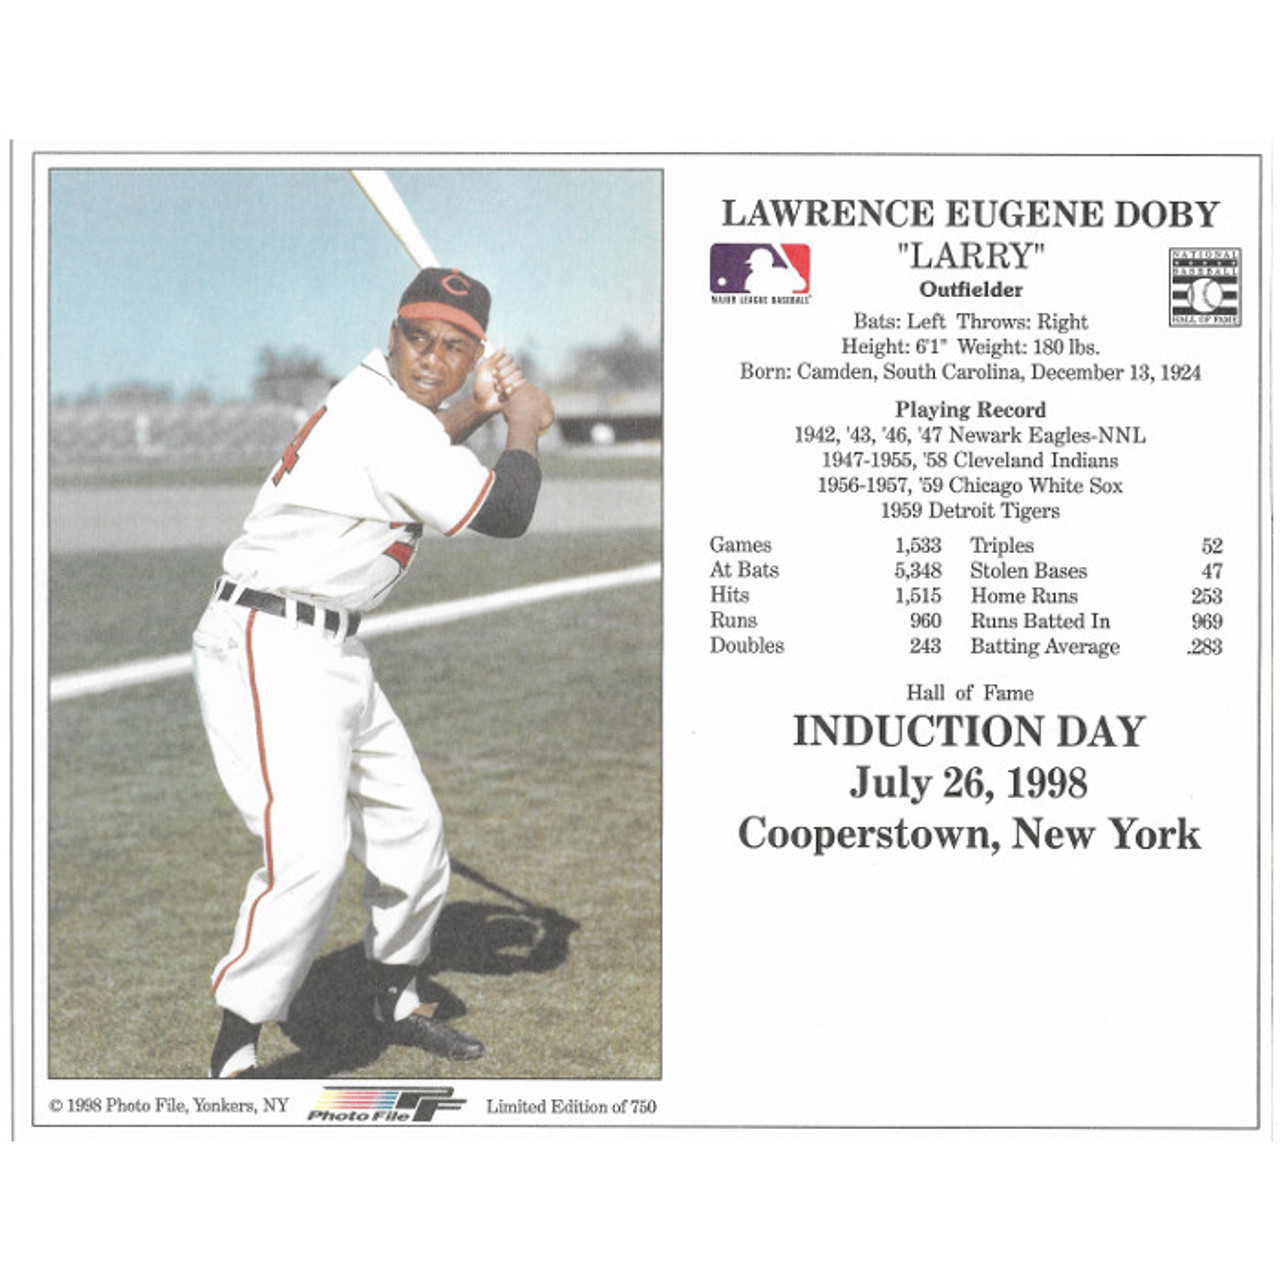 1998 Larry Doby Hall of Fame Induction Day Limited Edition (750